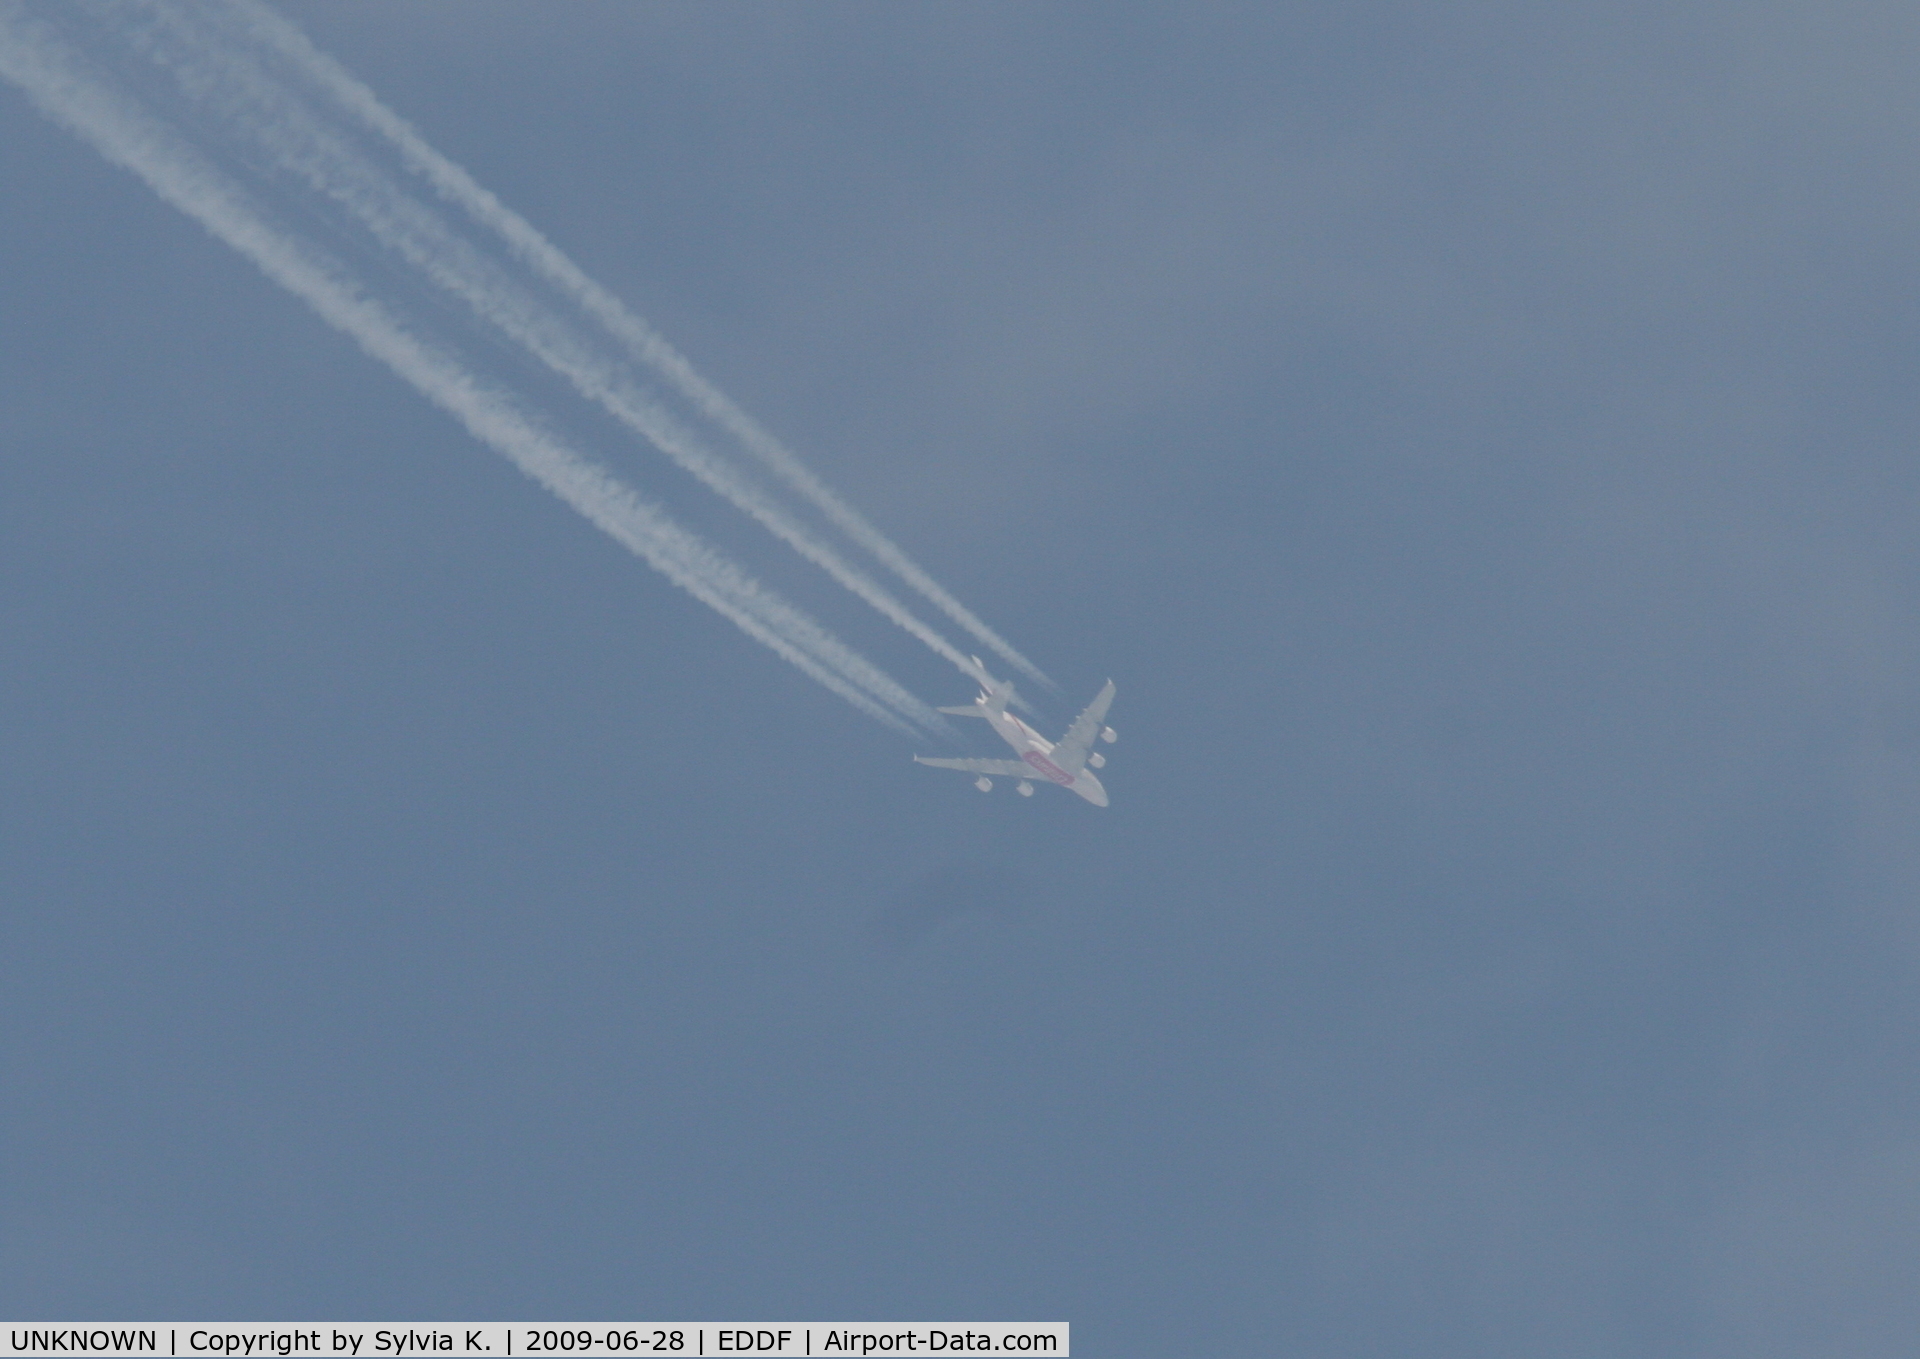 UNKNOWN, Contrails Various C/N Unknown, Emirates A380